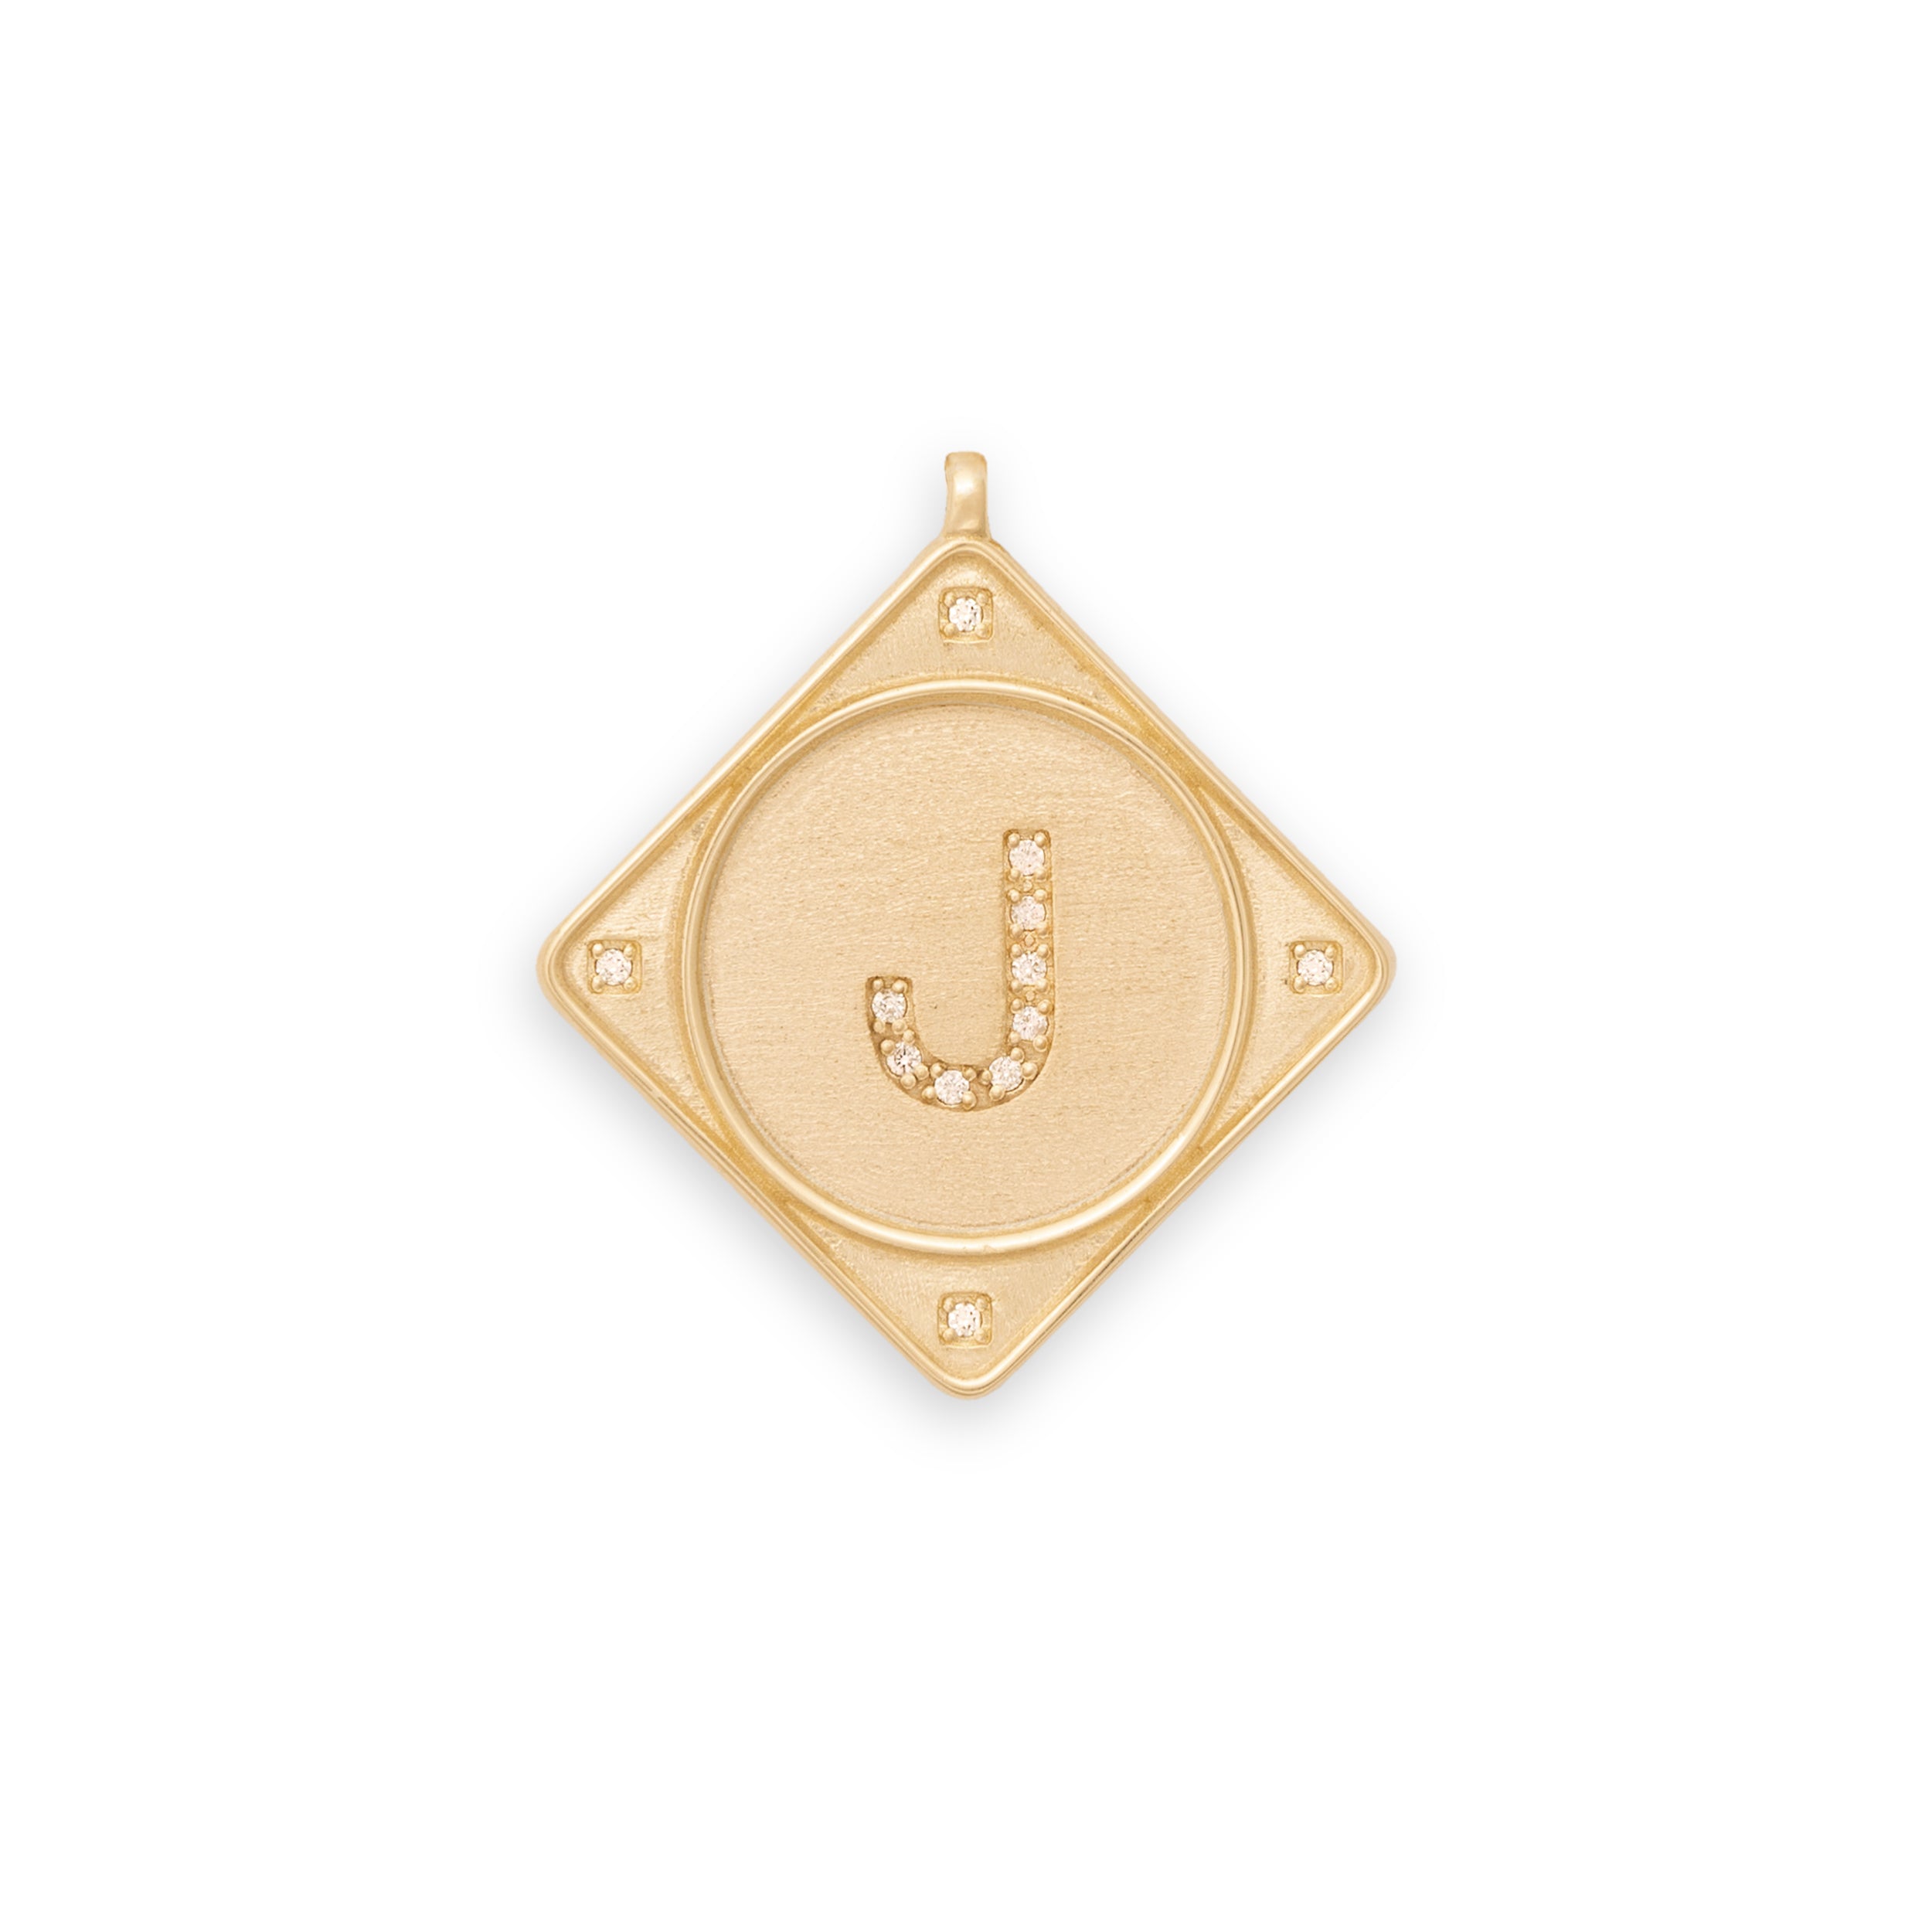 Bruno Yellow Gold and White Diamonds Letter Pendant on Long Chain